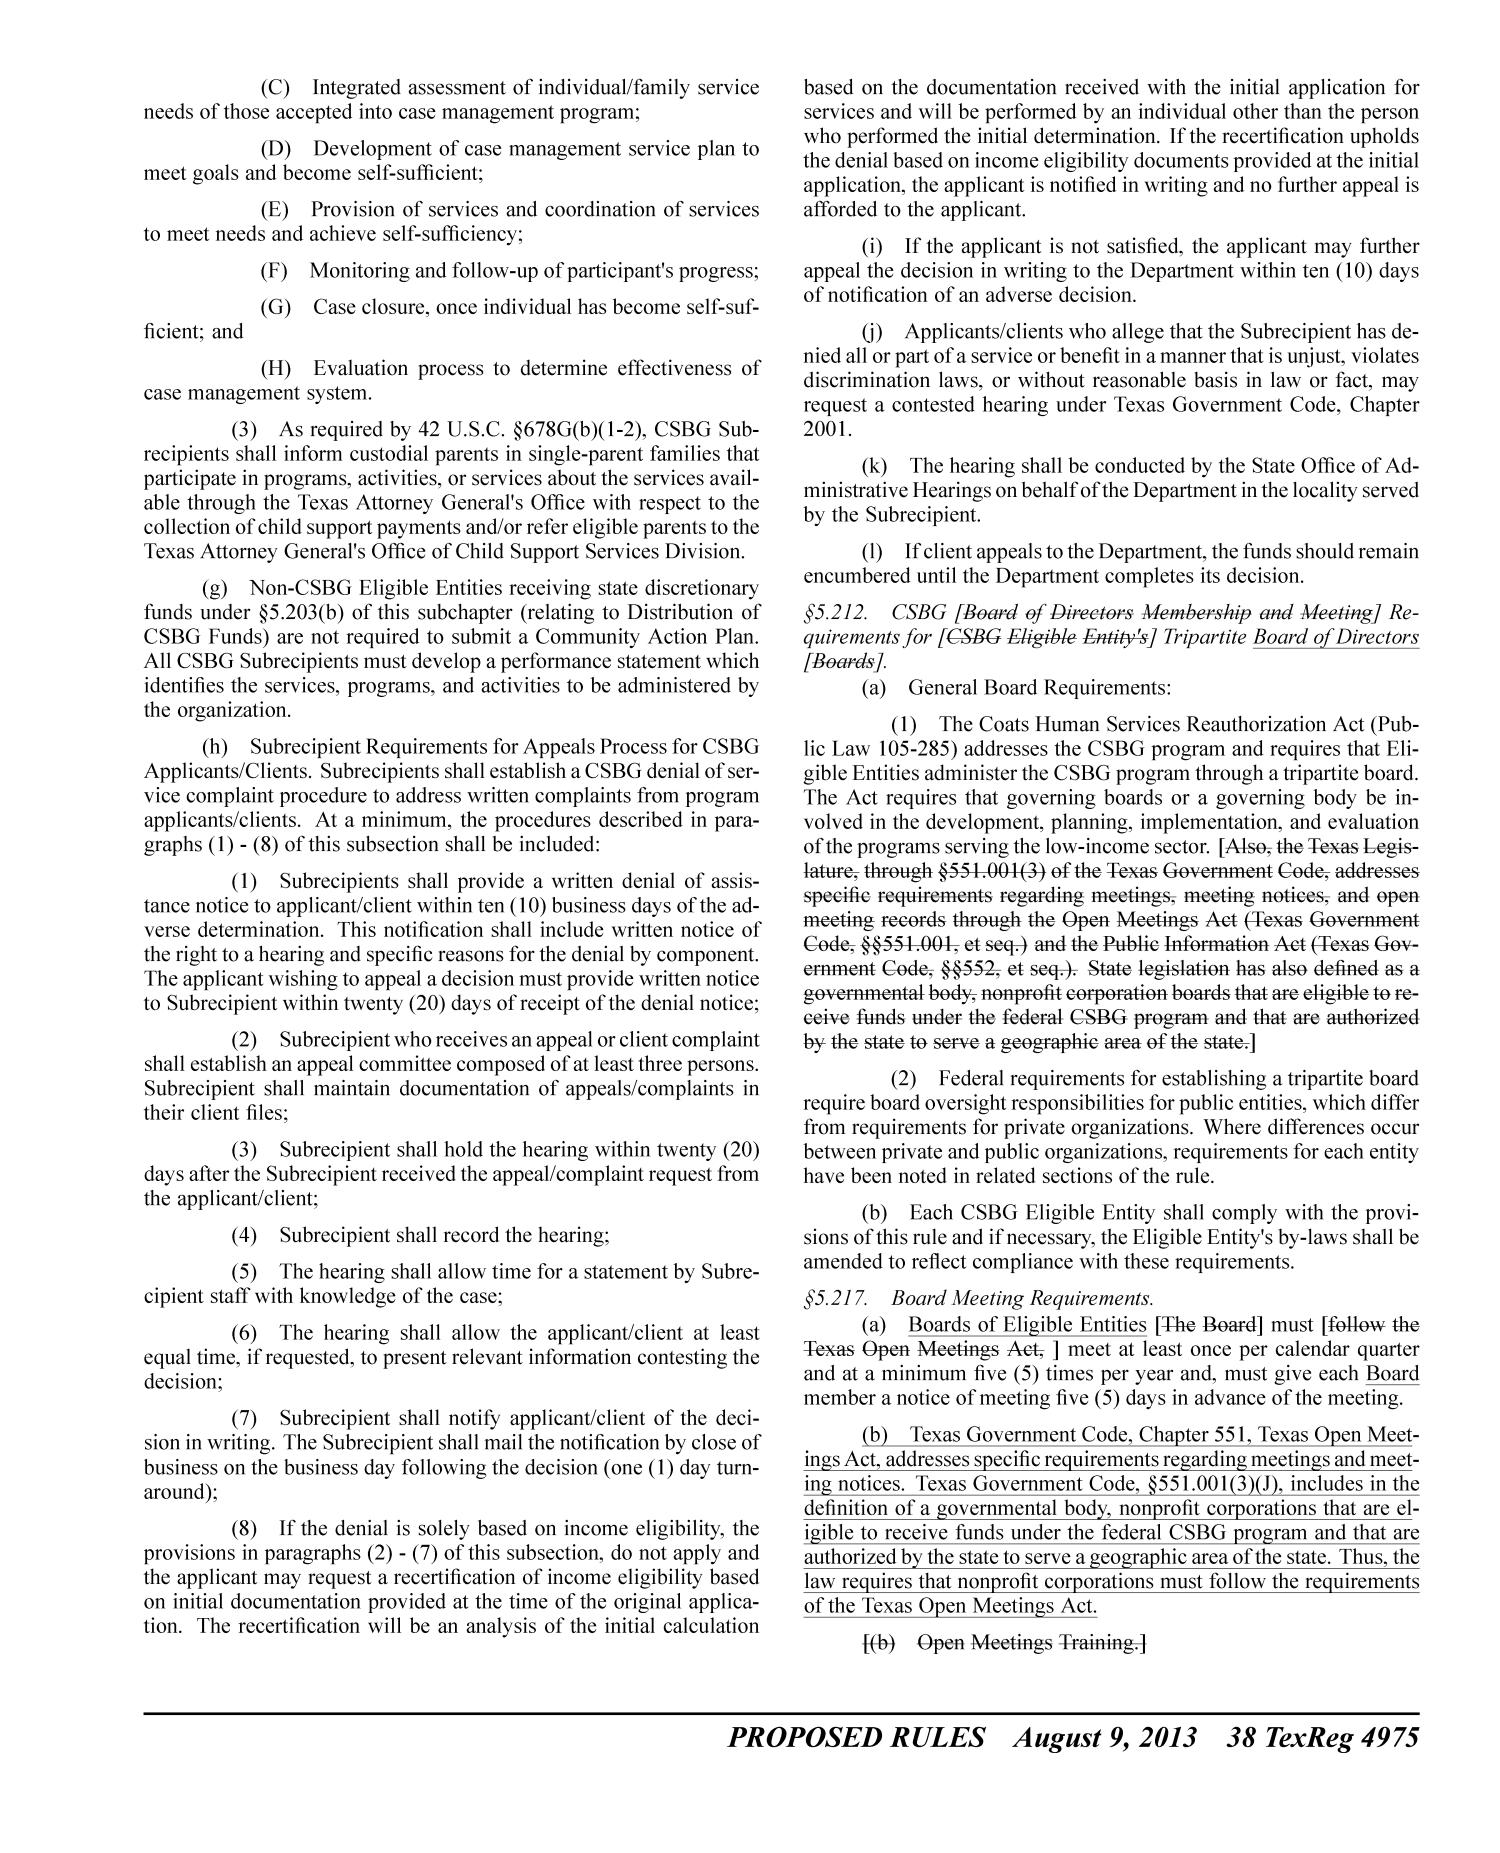 Texas Register, Volume 38, Number 32, Pages 4957-5134, August 9, 2013
                                                
                                                    4975
                                                